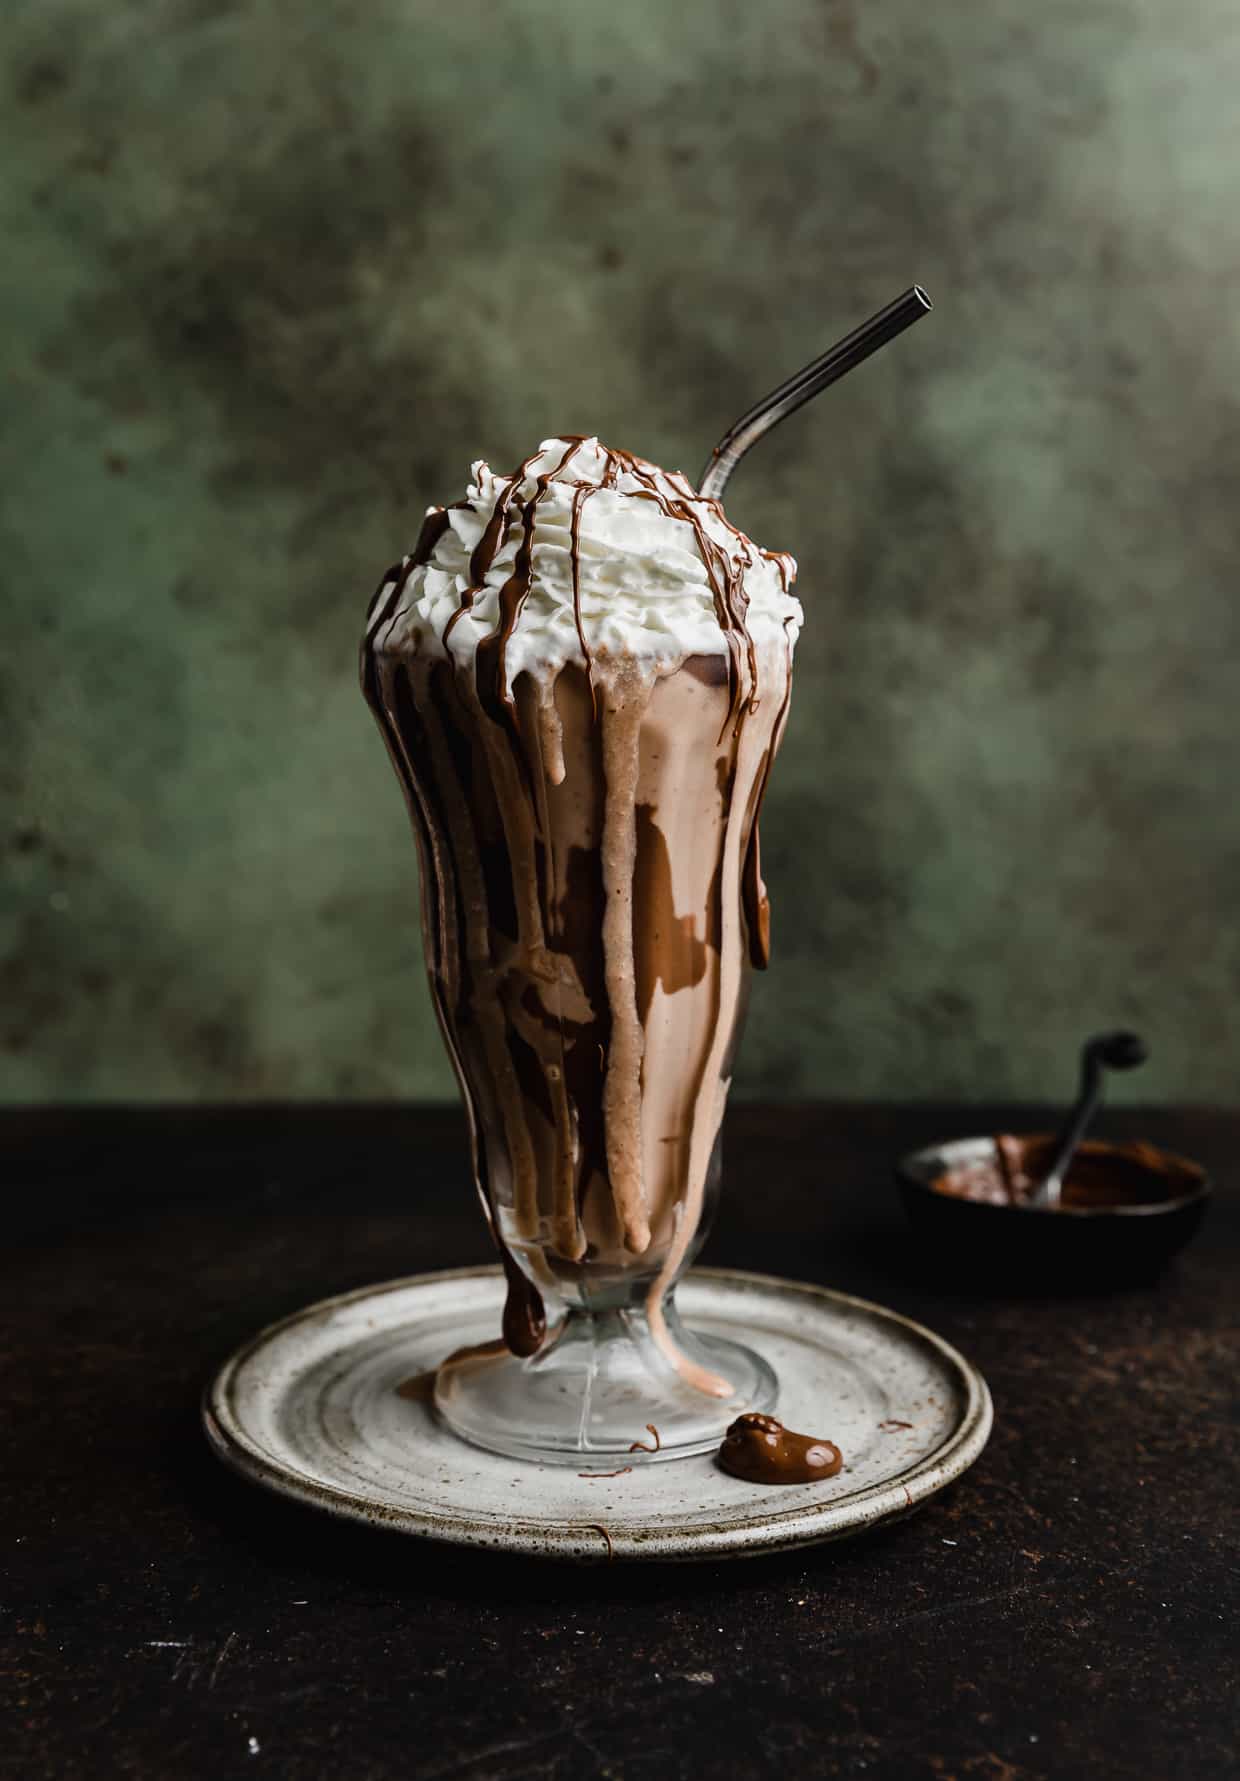 A glass cup with Nutella Milkshake in it, against a dark green textured background.